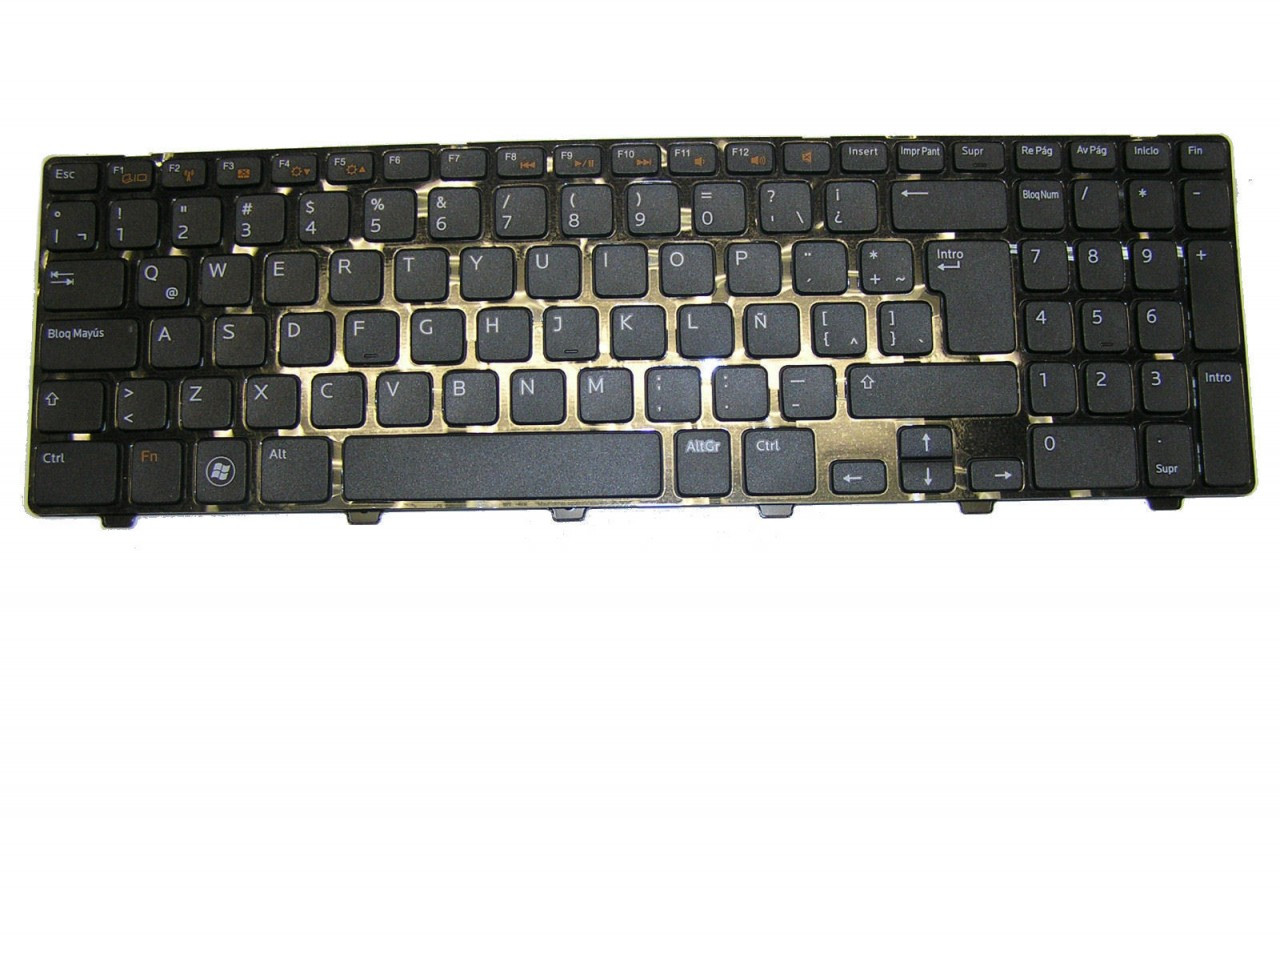 Dell Inspiron 17r Spanish Latin Keyboard Cn 011t1f Nsk Dy0sw 1e Notebookparts Com